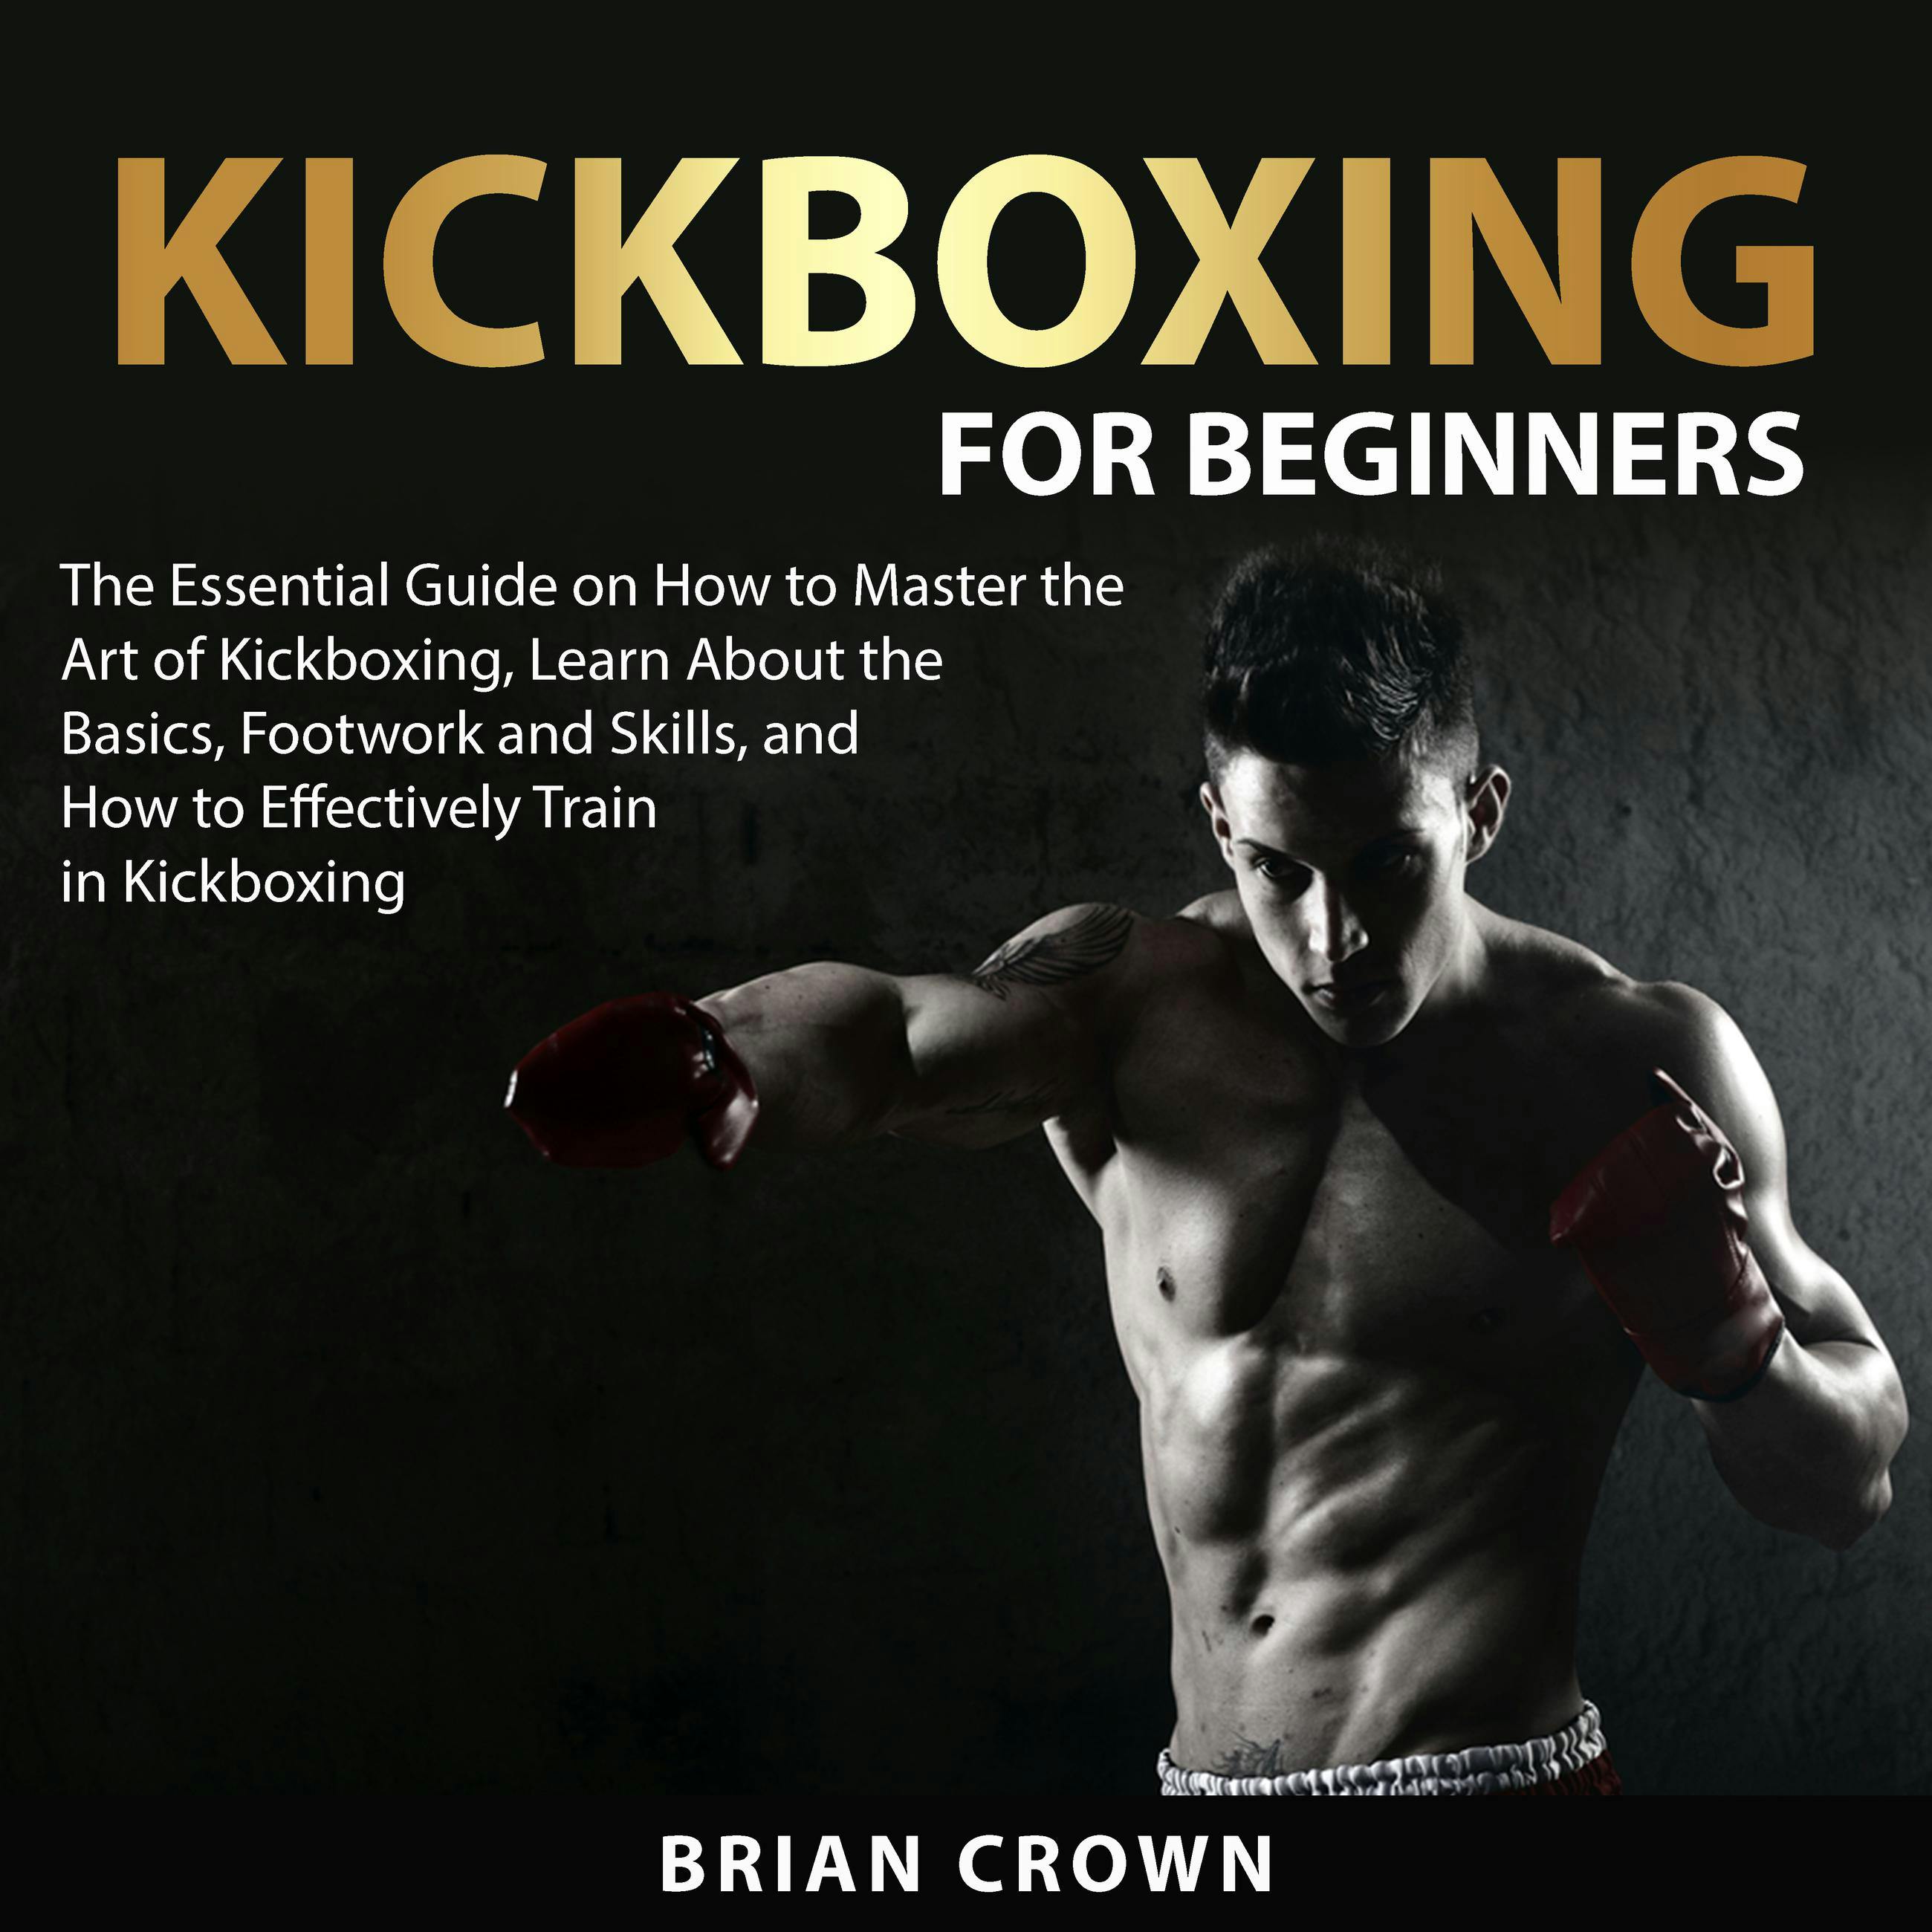 Kickboxing For Beginners: The Essential Guide on How to Master the Art of Kickboxing, Learn About the Basics, Footwork and Skills, and How to Effectively Train in Kickboxing - Brian Crown